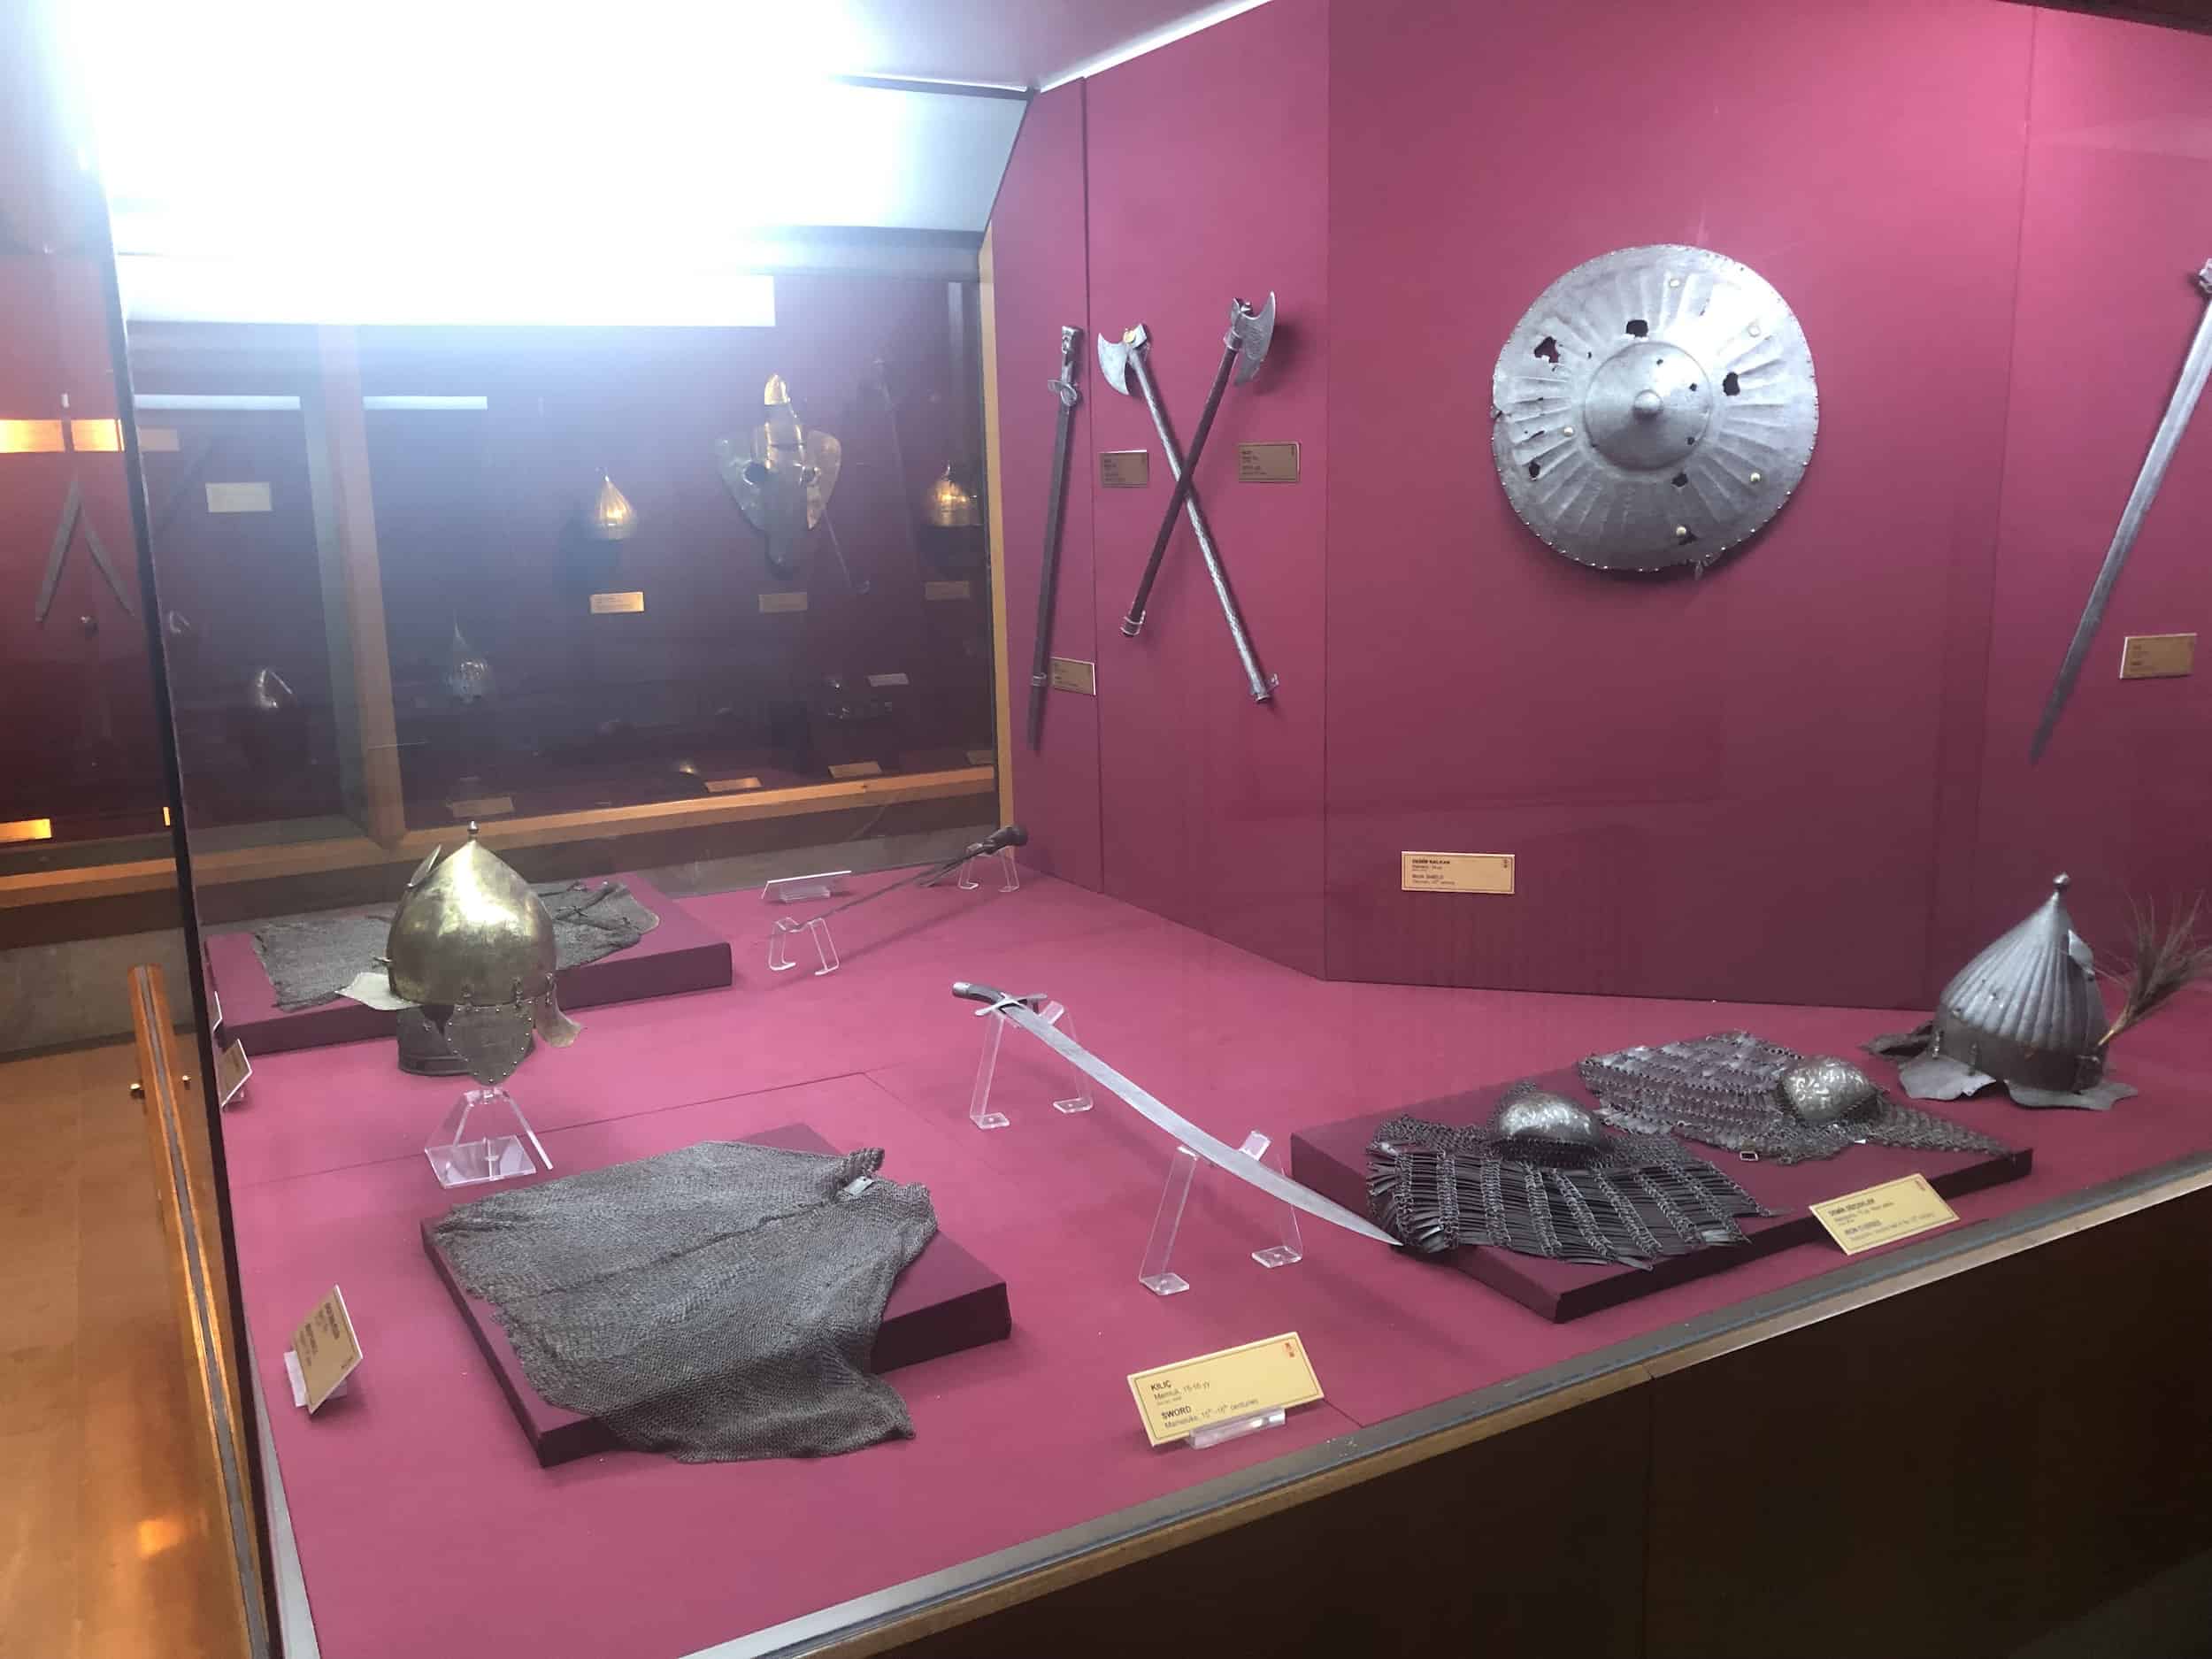 Weapons and armor from the Ottoman period in the Ottoman Rising Period Hall 